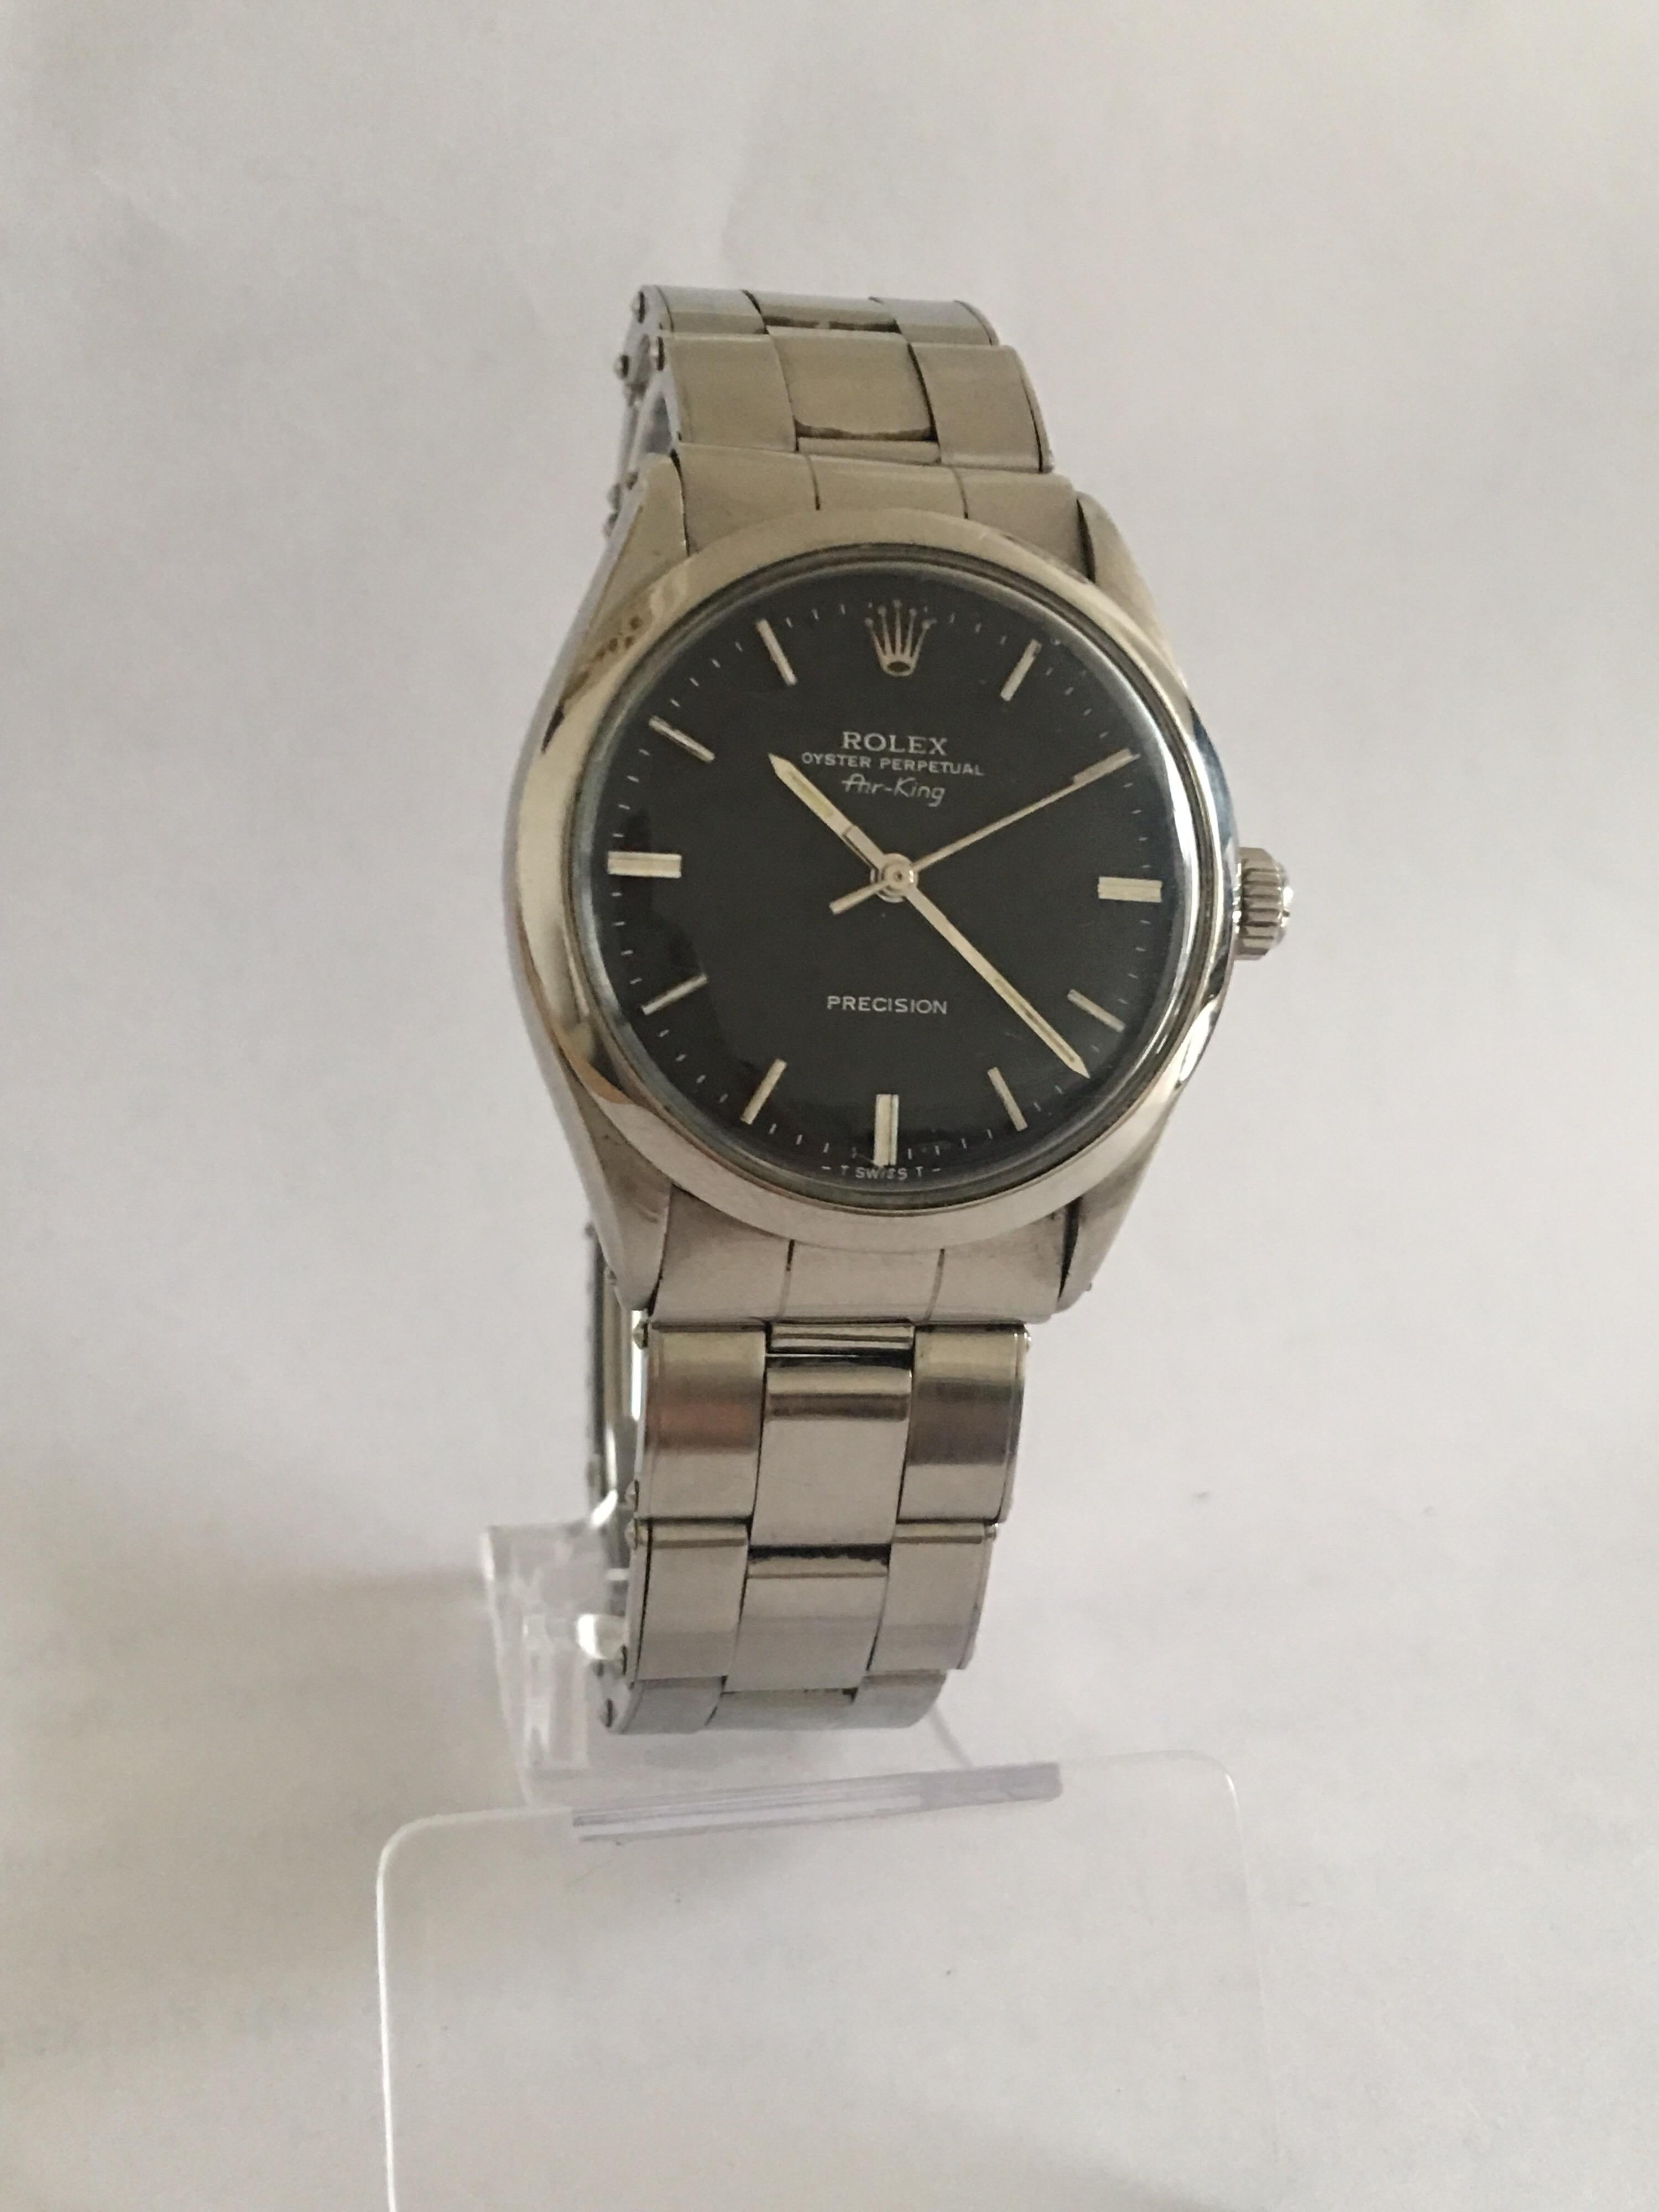 Vintage 1960s Rolex Oyster Perpetual Air-King Precision, 1520 For Sale 8